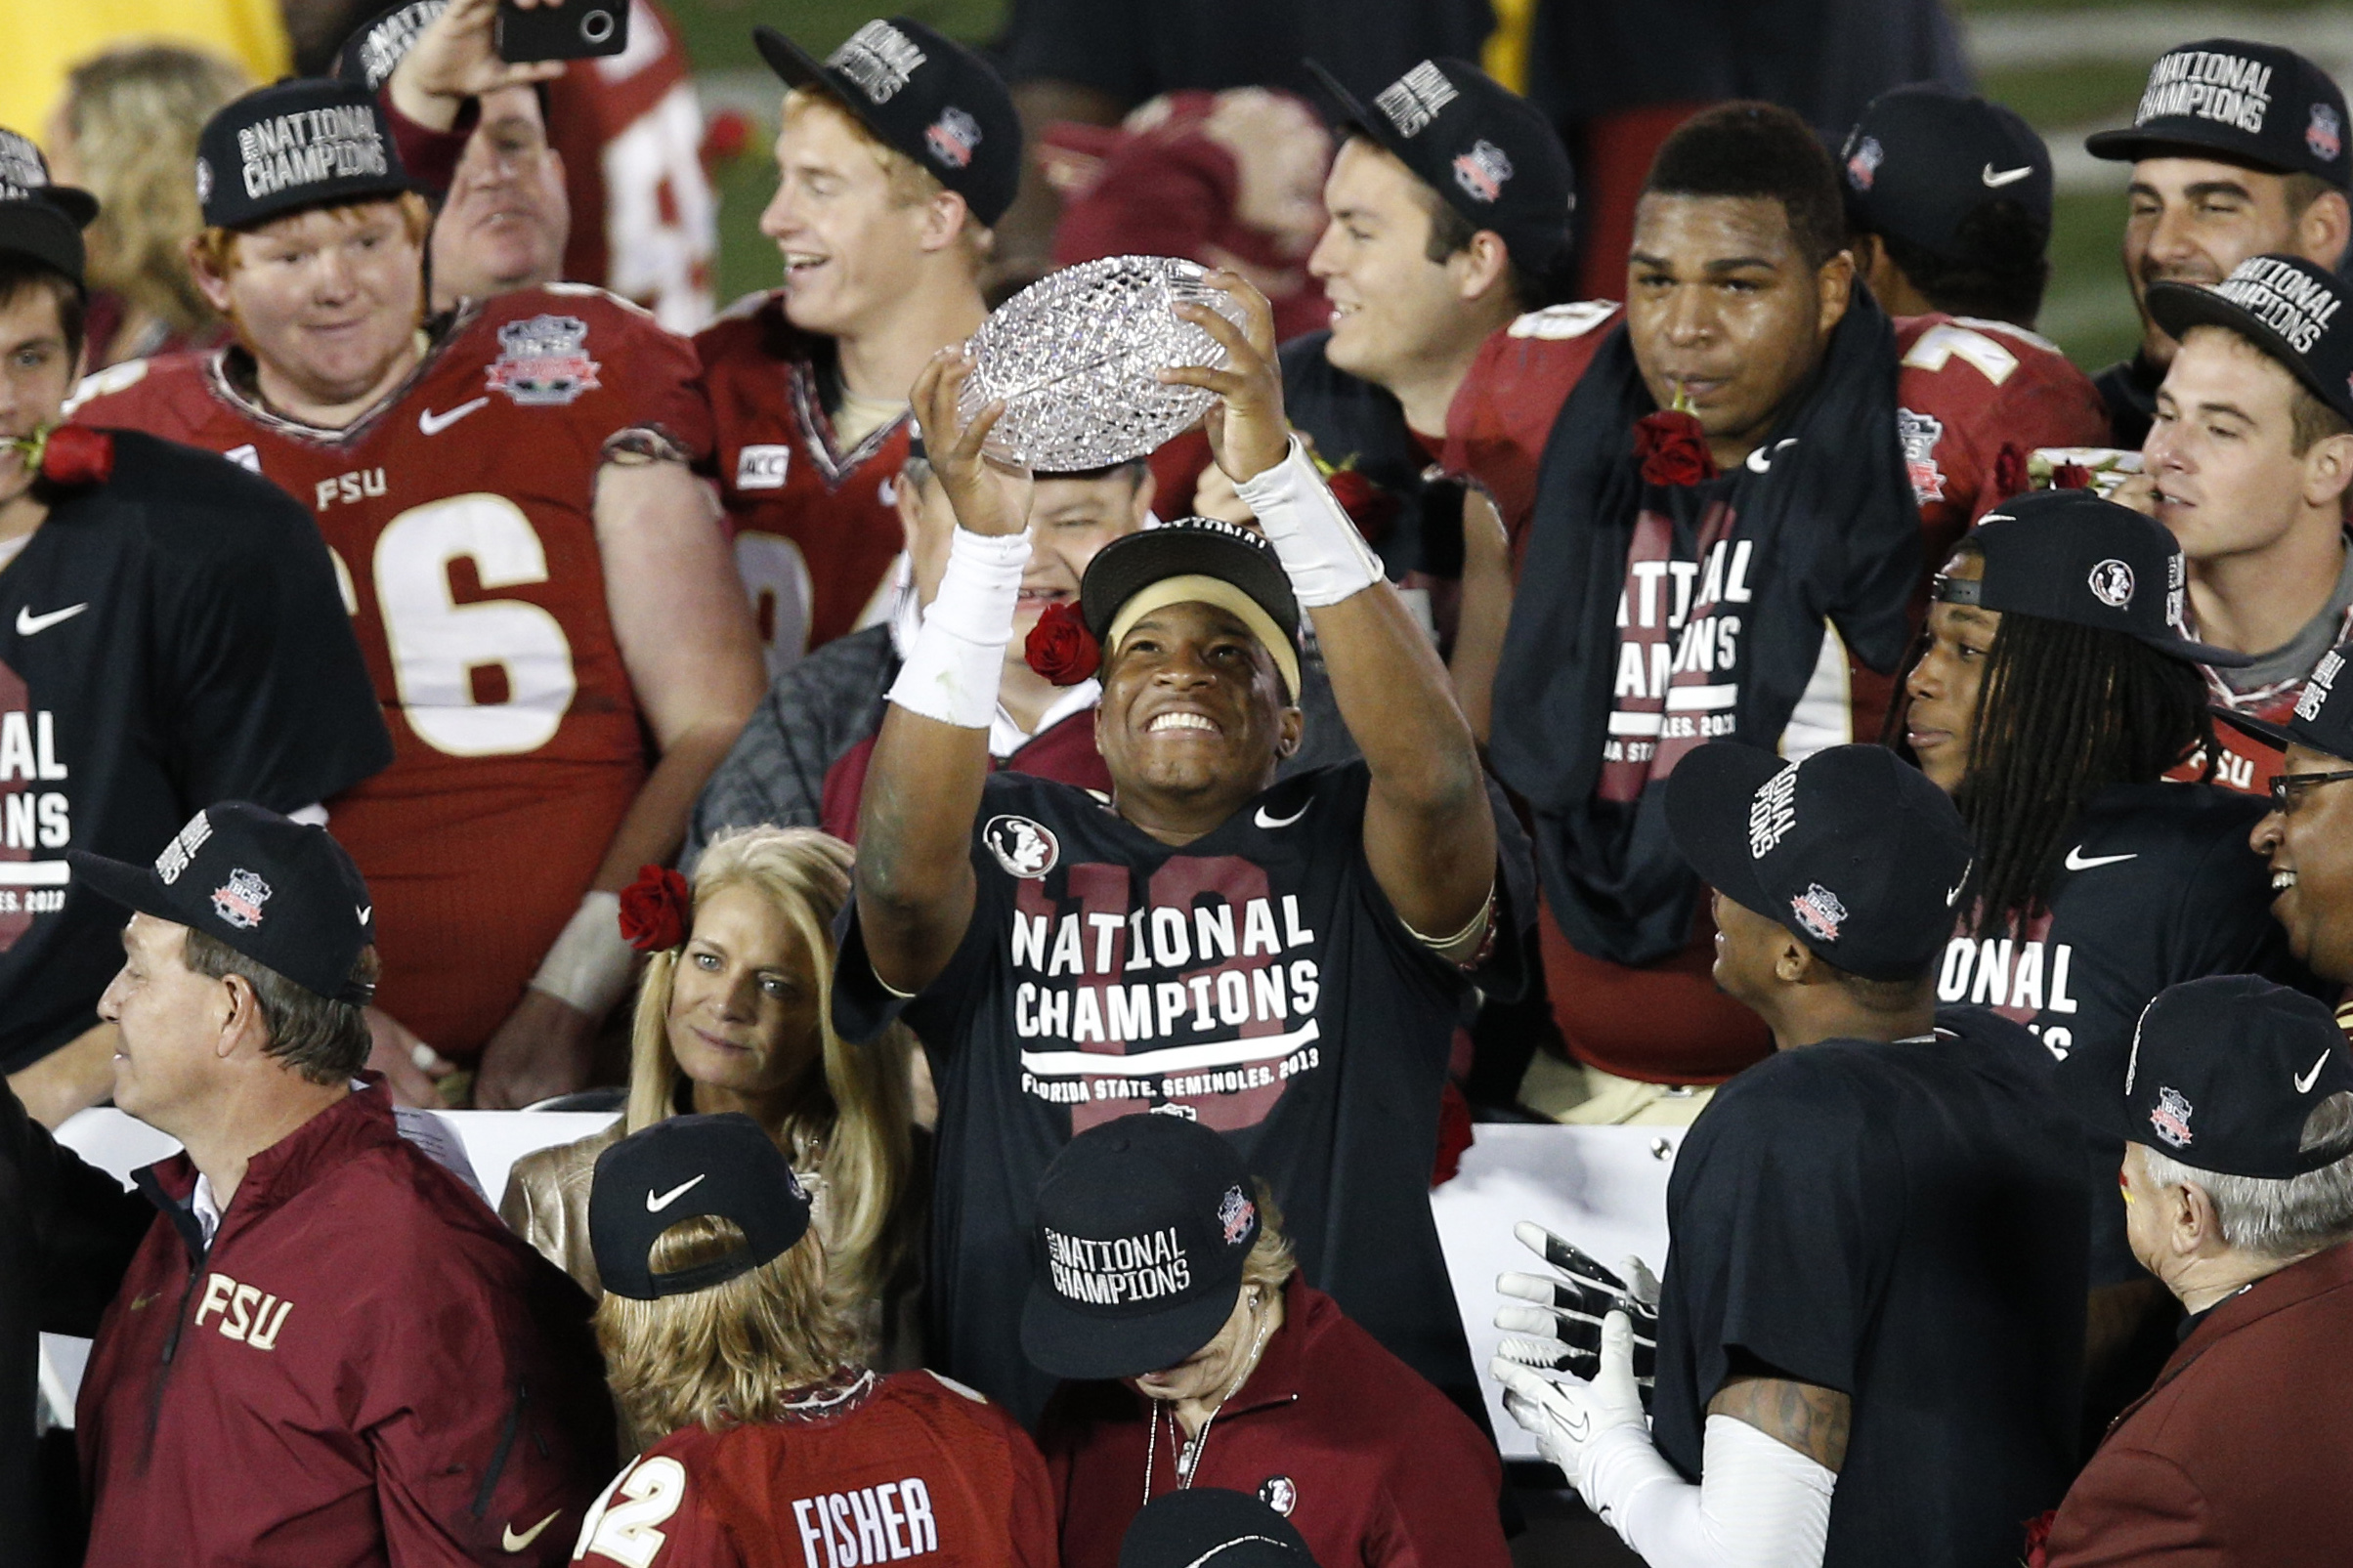 Florida State celebrated in the Rose Bowl after winning last year's national championship. (Kelvin Kuo, USA TODAY Sports)